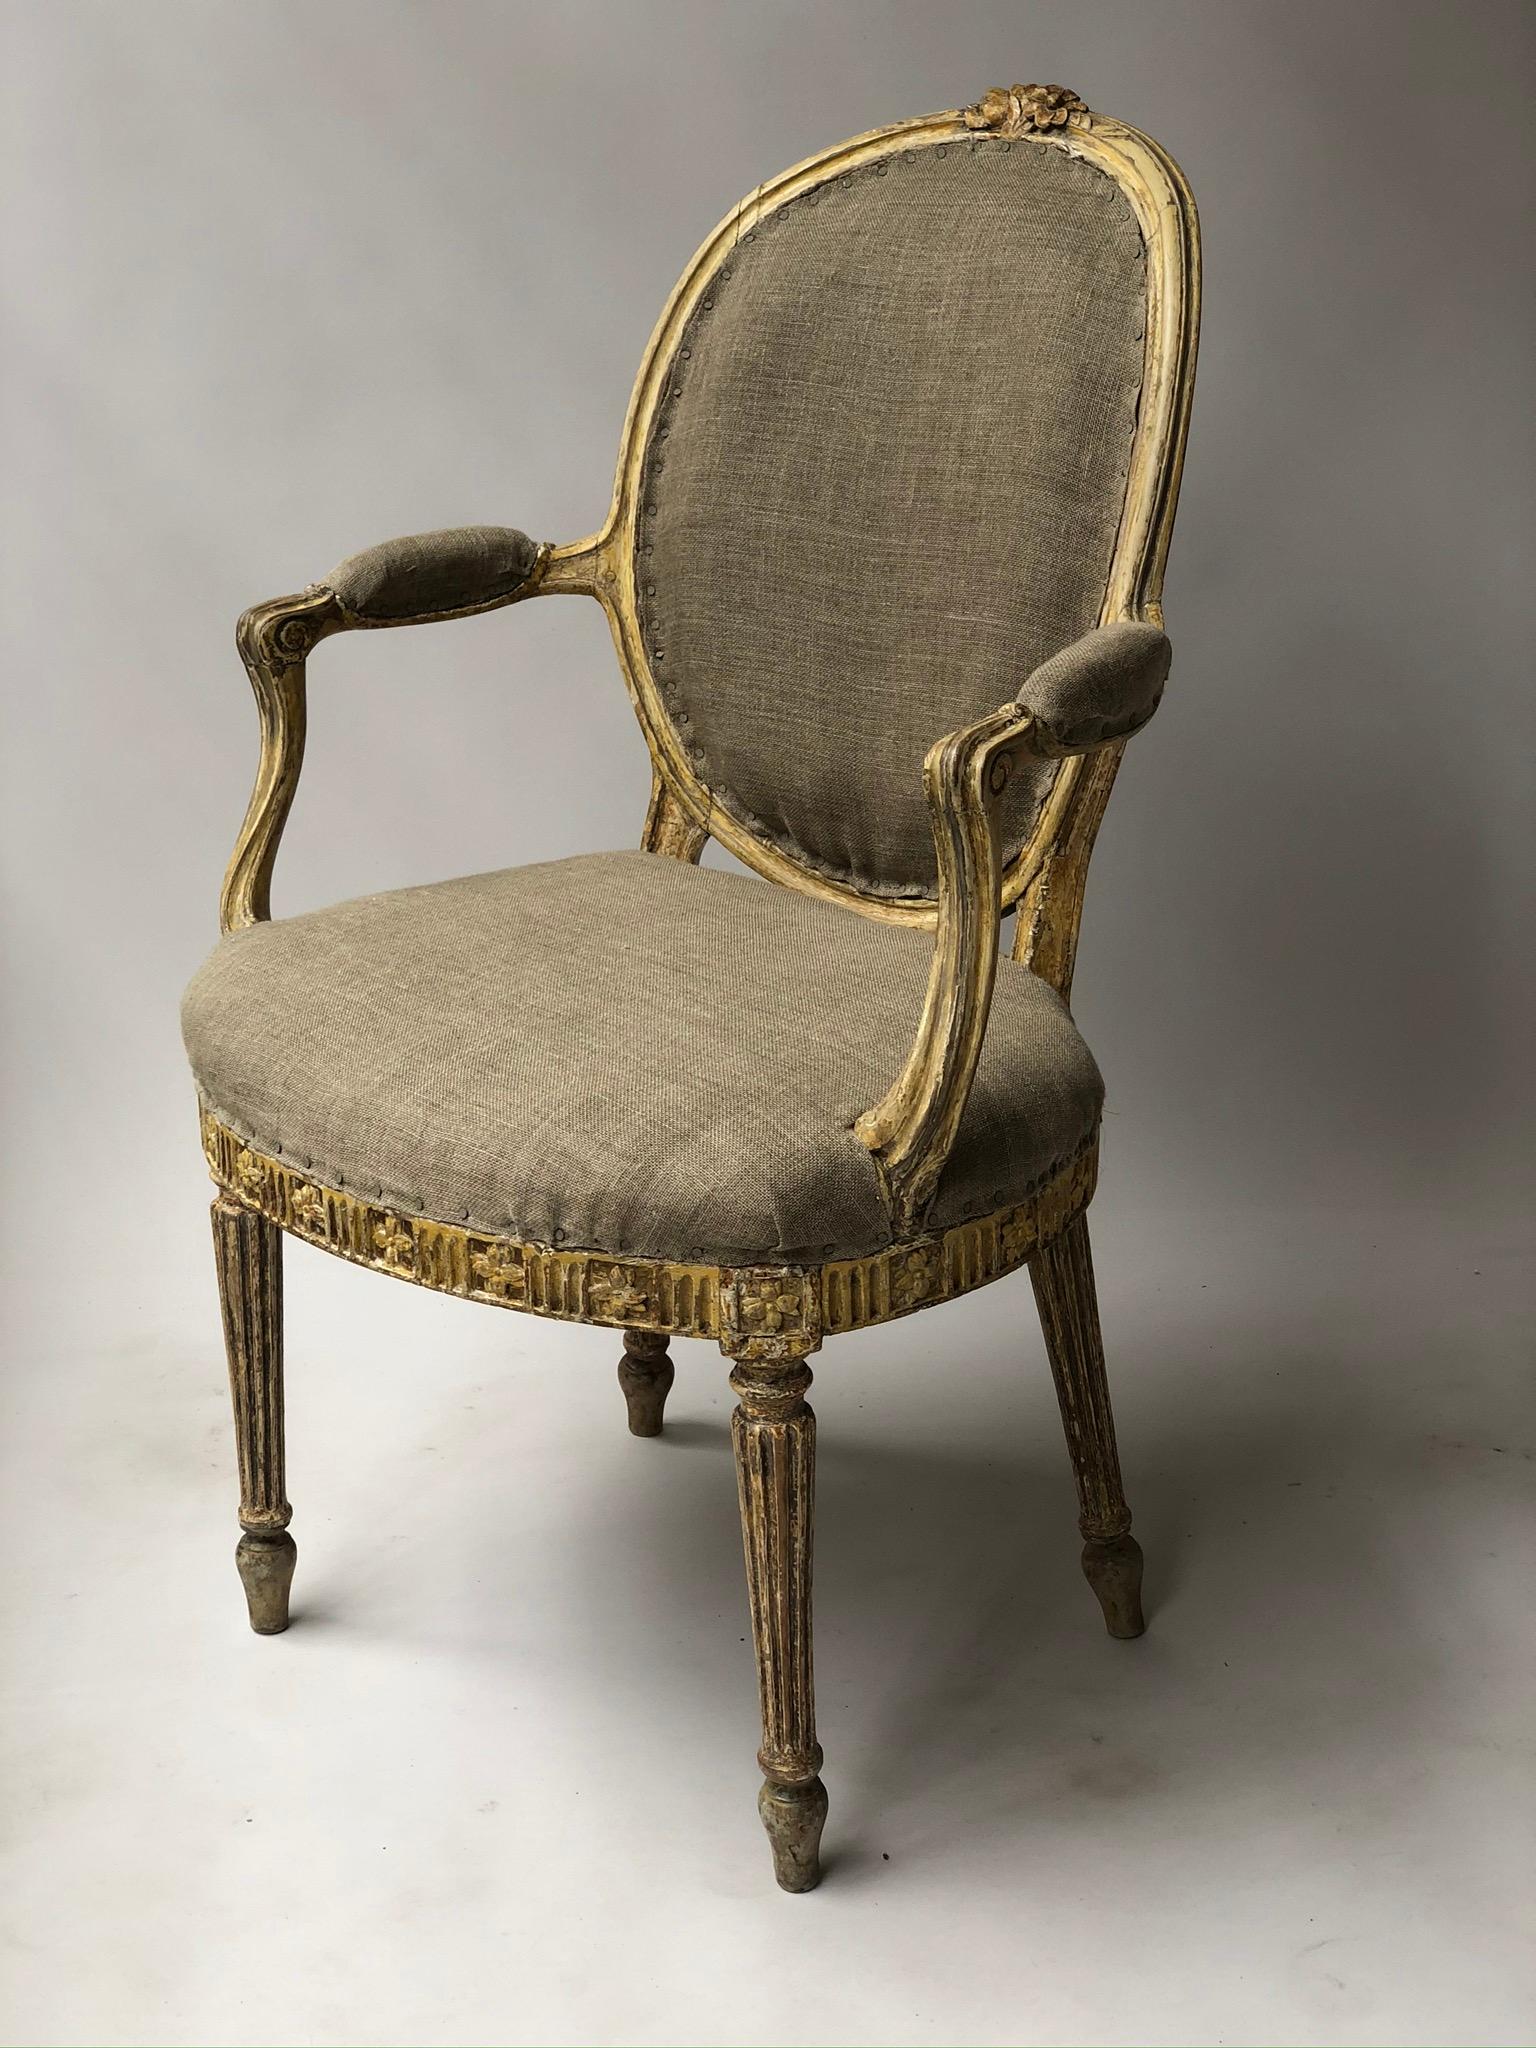 A pair of English George III period painted and gilded armchairs each with padded oval back, stuff over upholstered seat, carved and gilded frieze and turned fluted tapering supports
These circa 1770s English armchairs display much evidence of